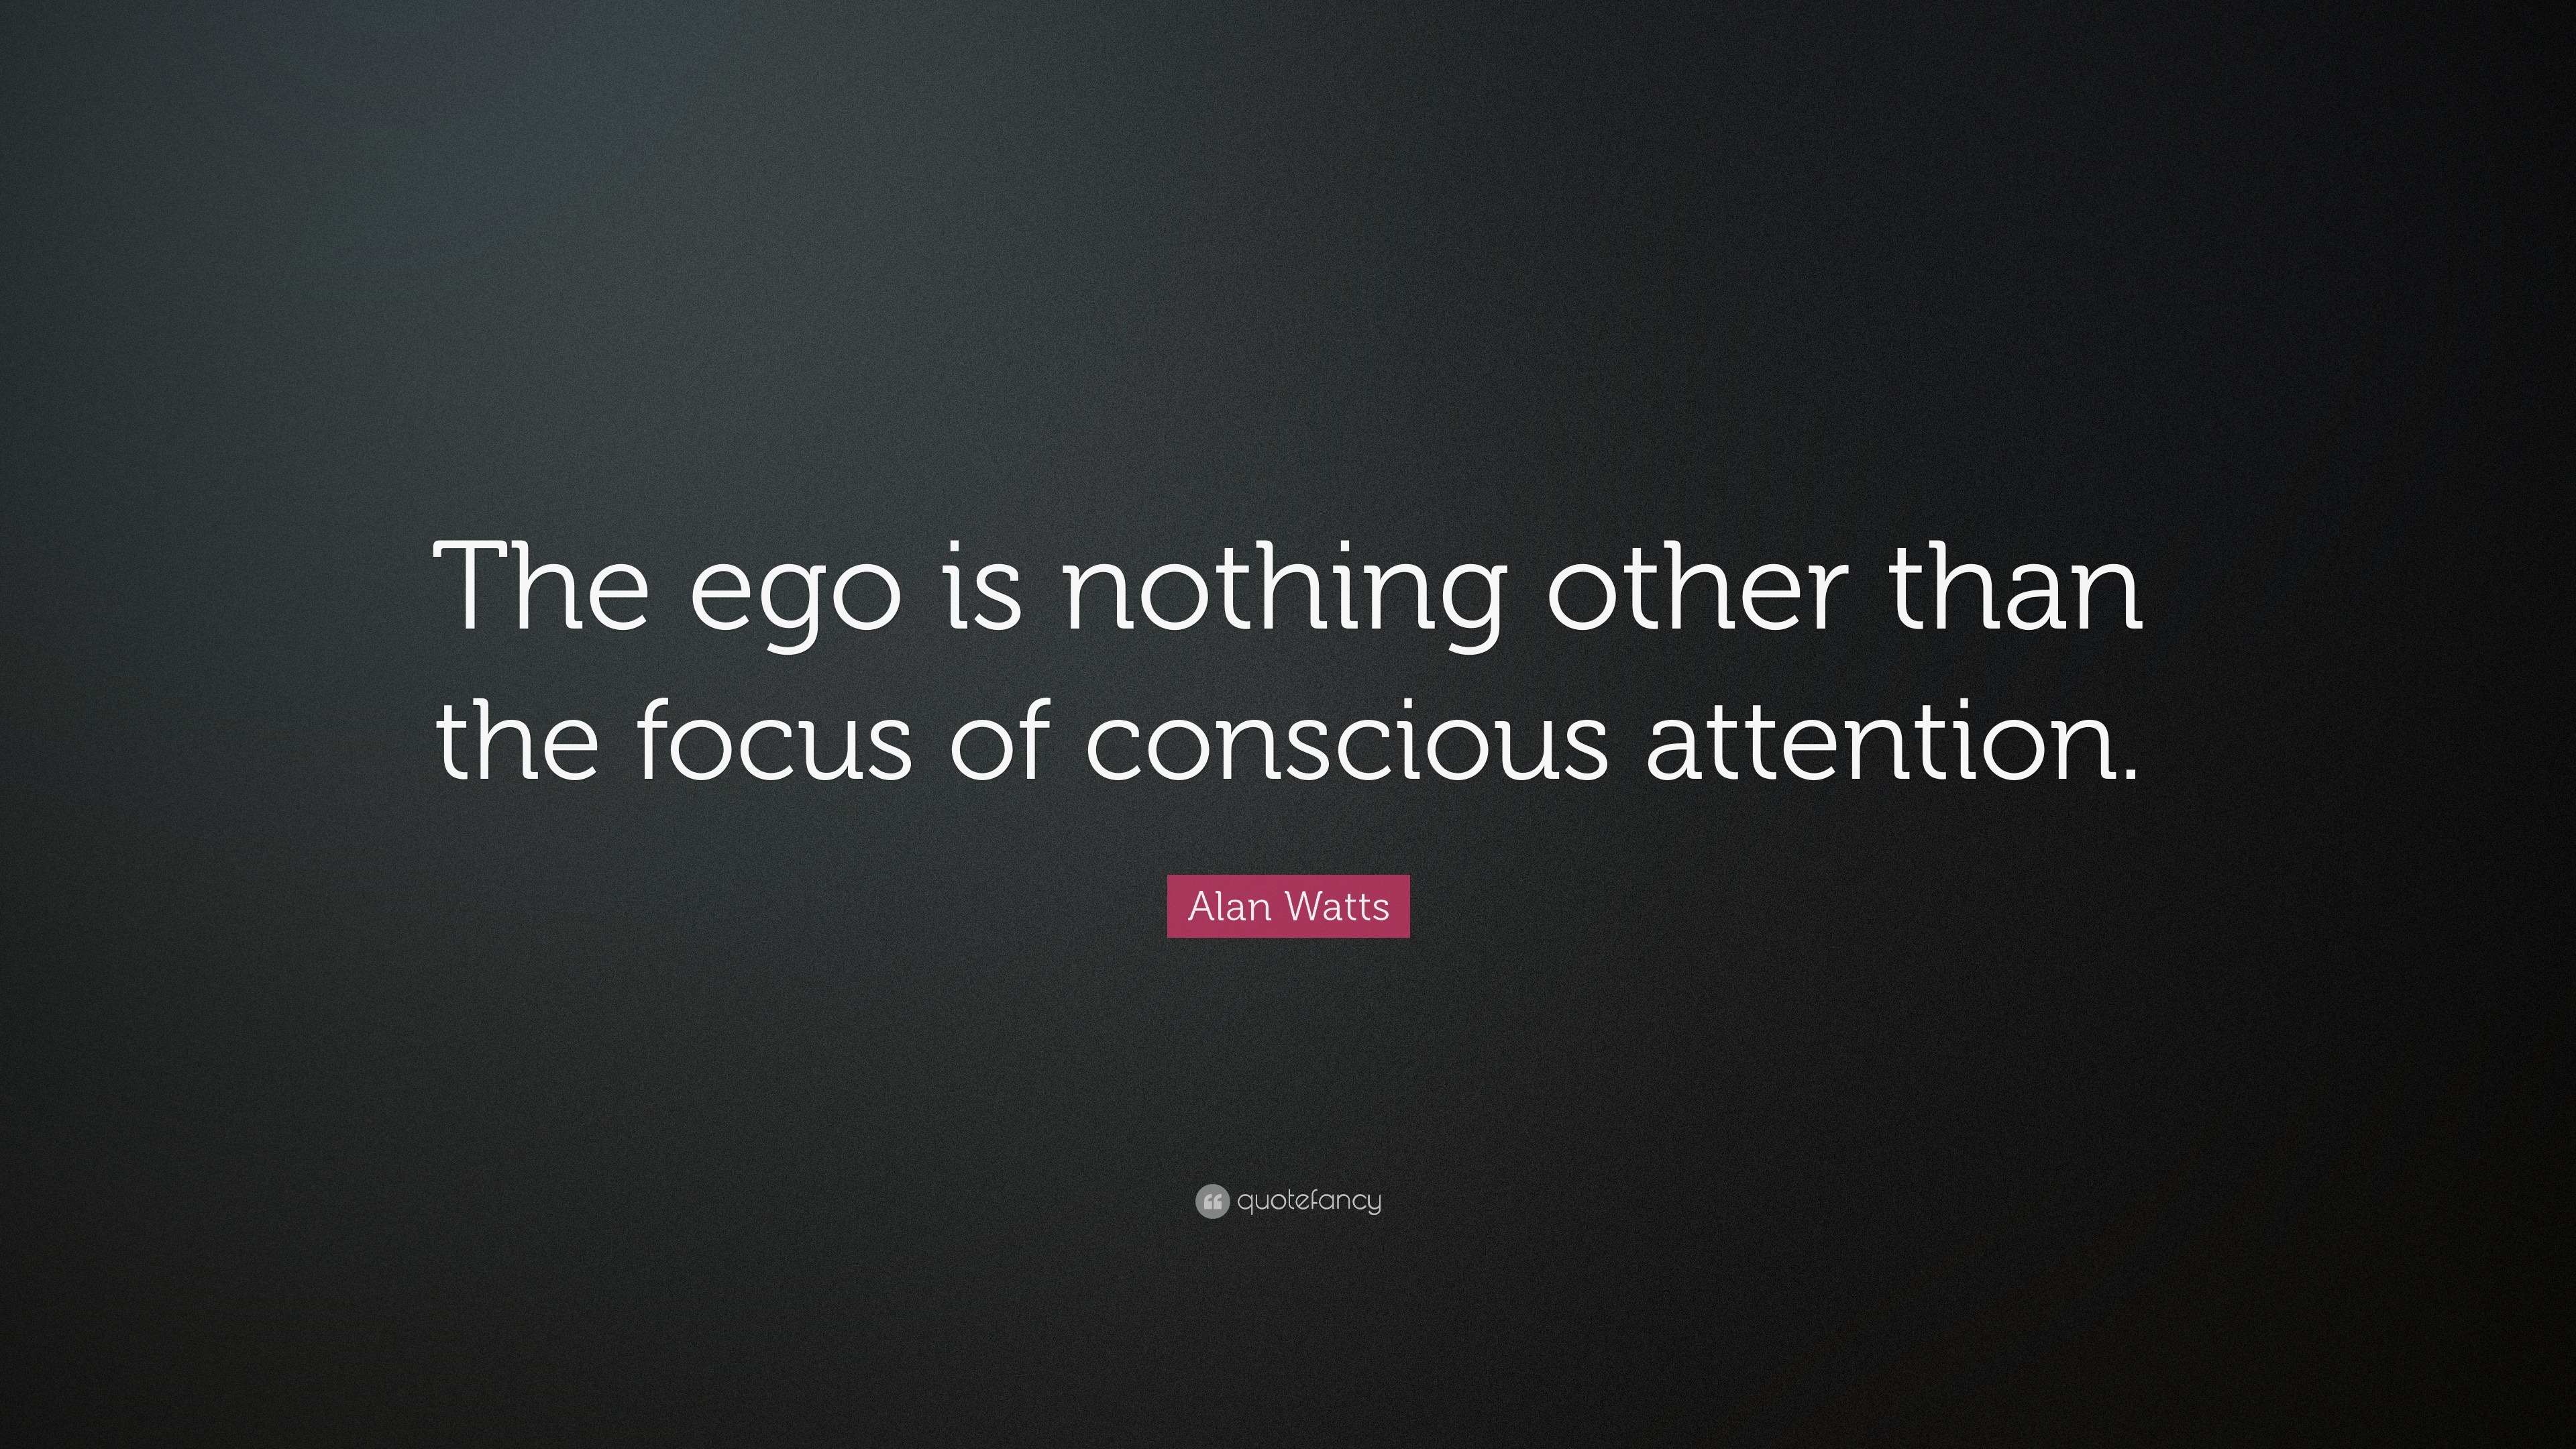 Alan Watts Quote: “The ego is nothing other than the focus of conscious ...